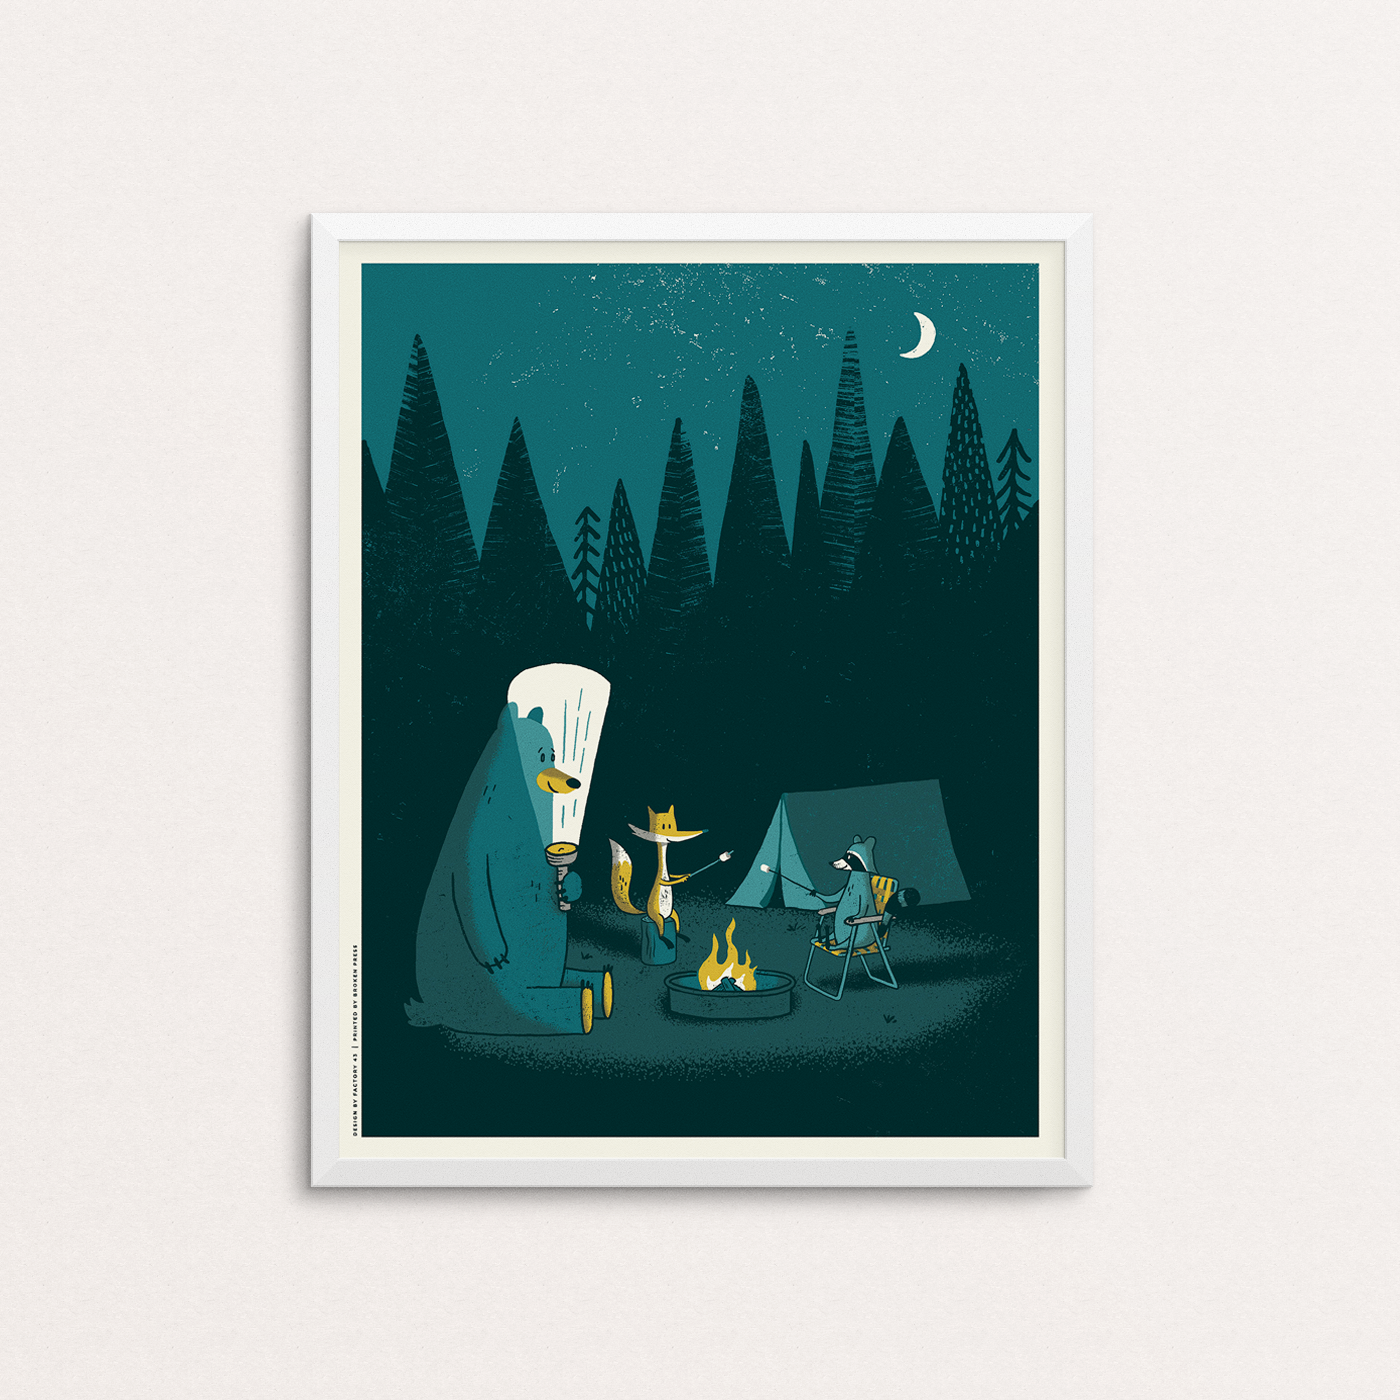 Camping Out Poster